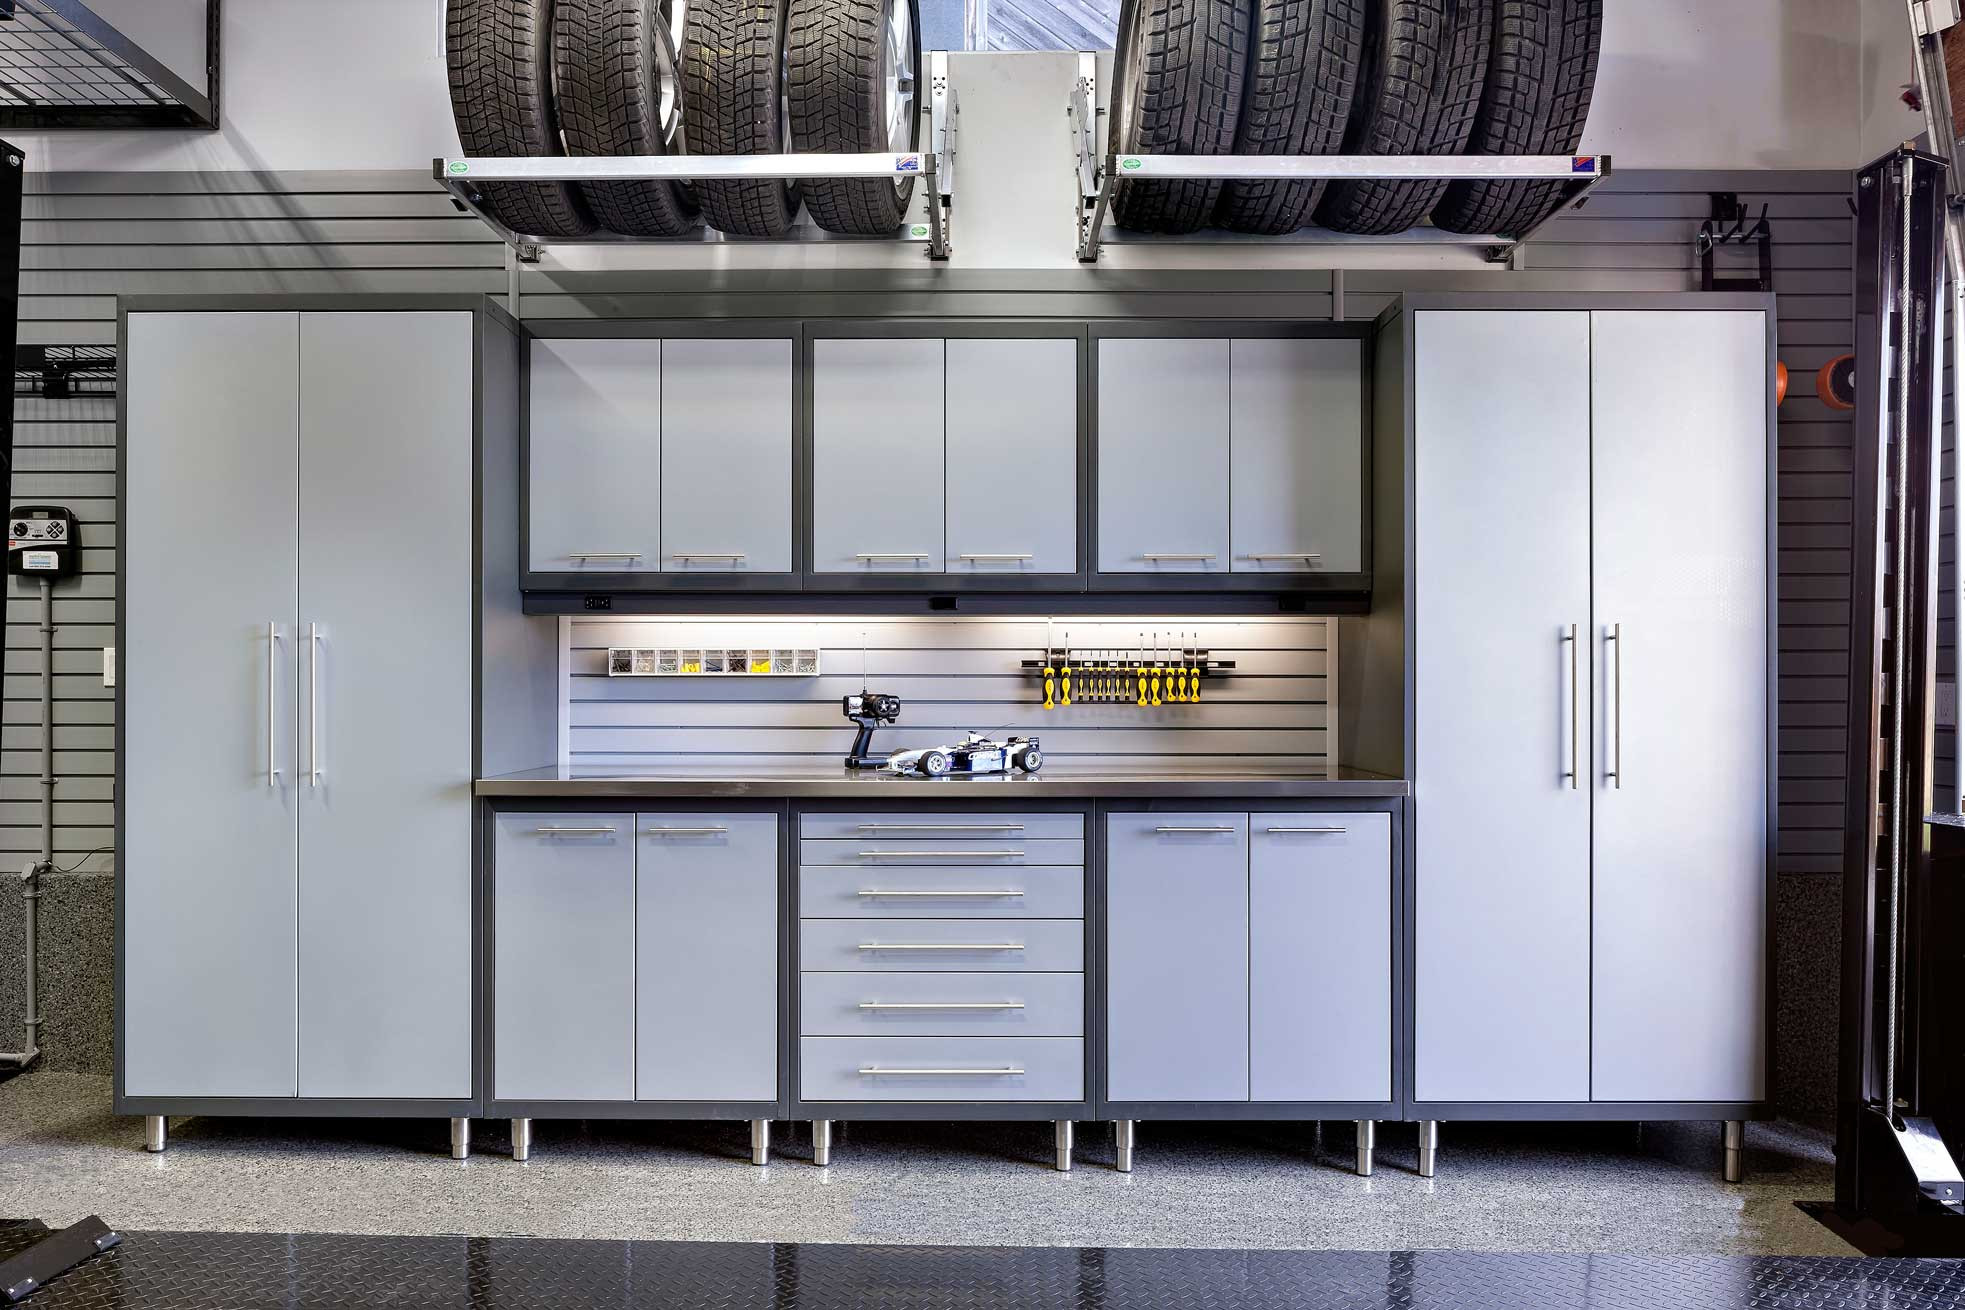 Garage Organization Systems
 4 Storage Options That Will Maximize Your Garage Space